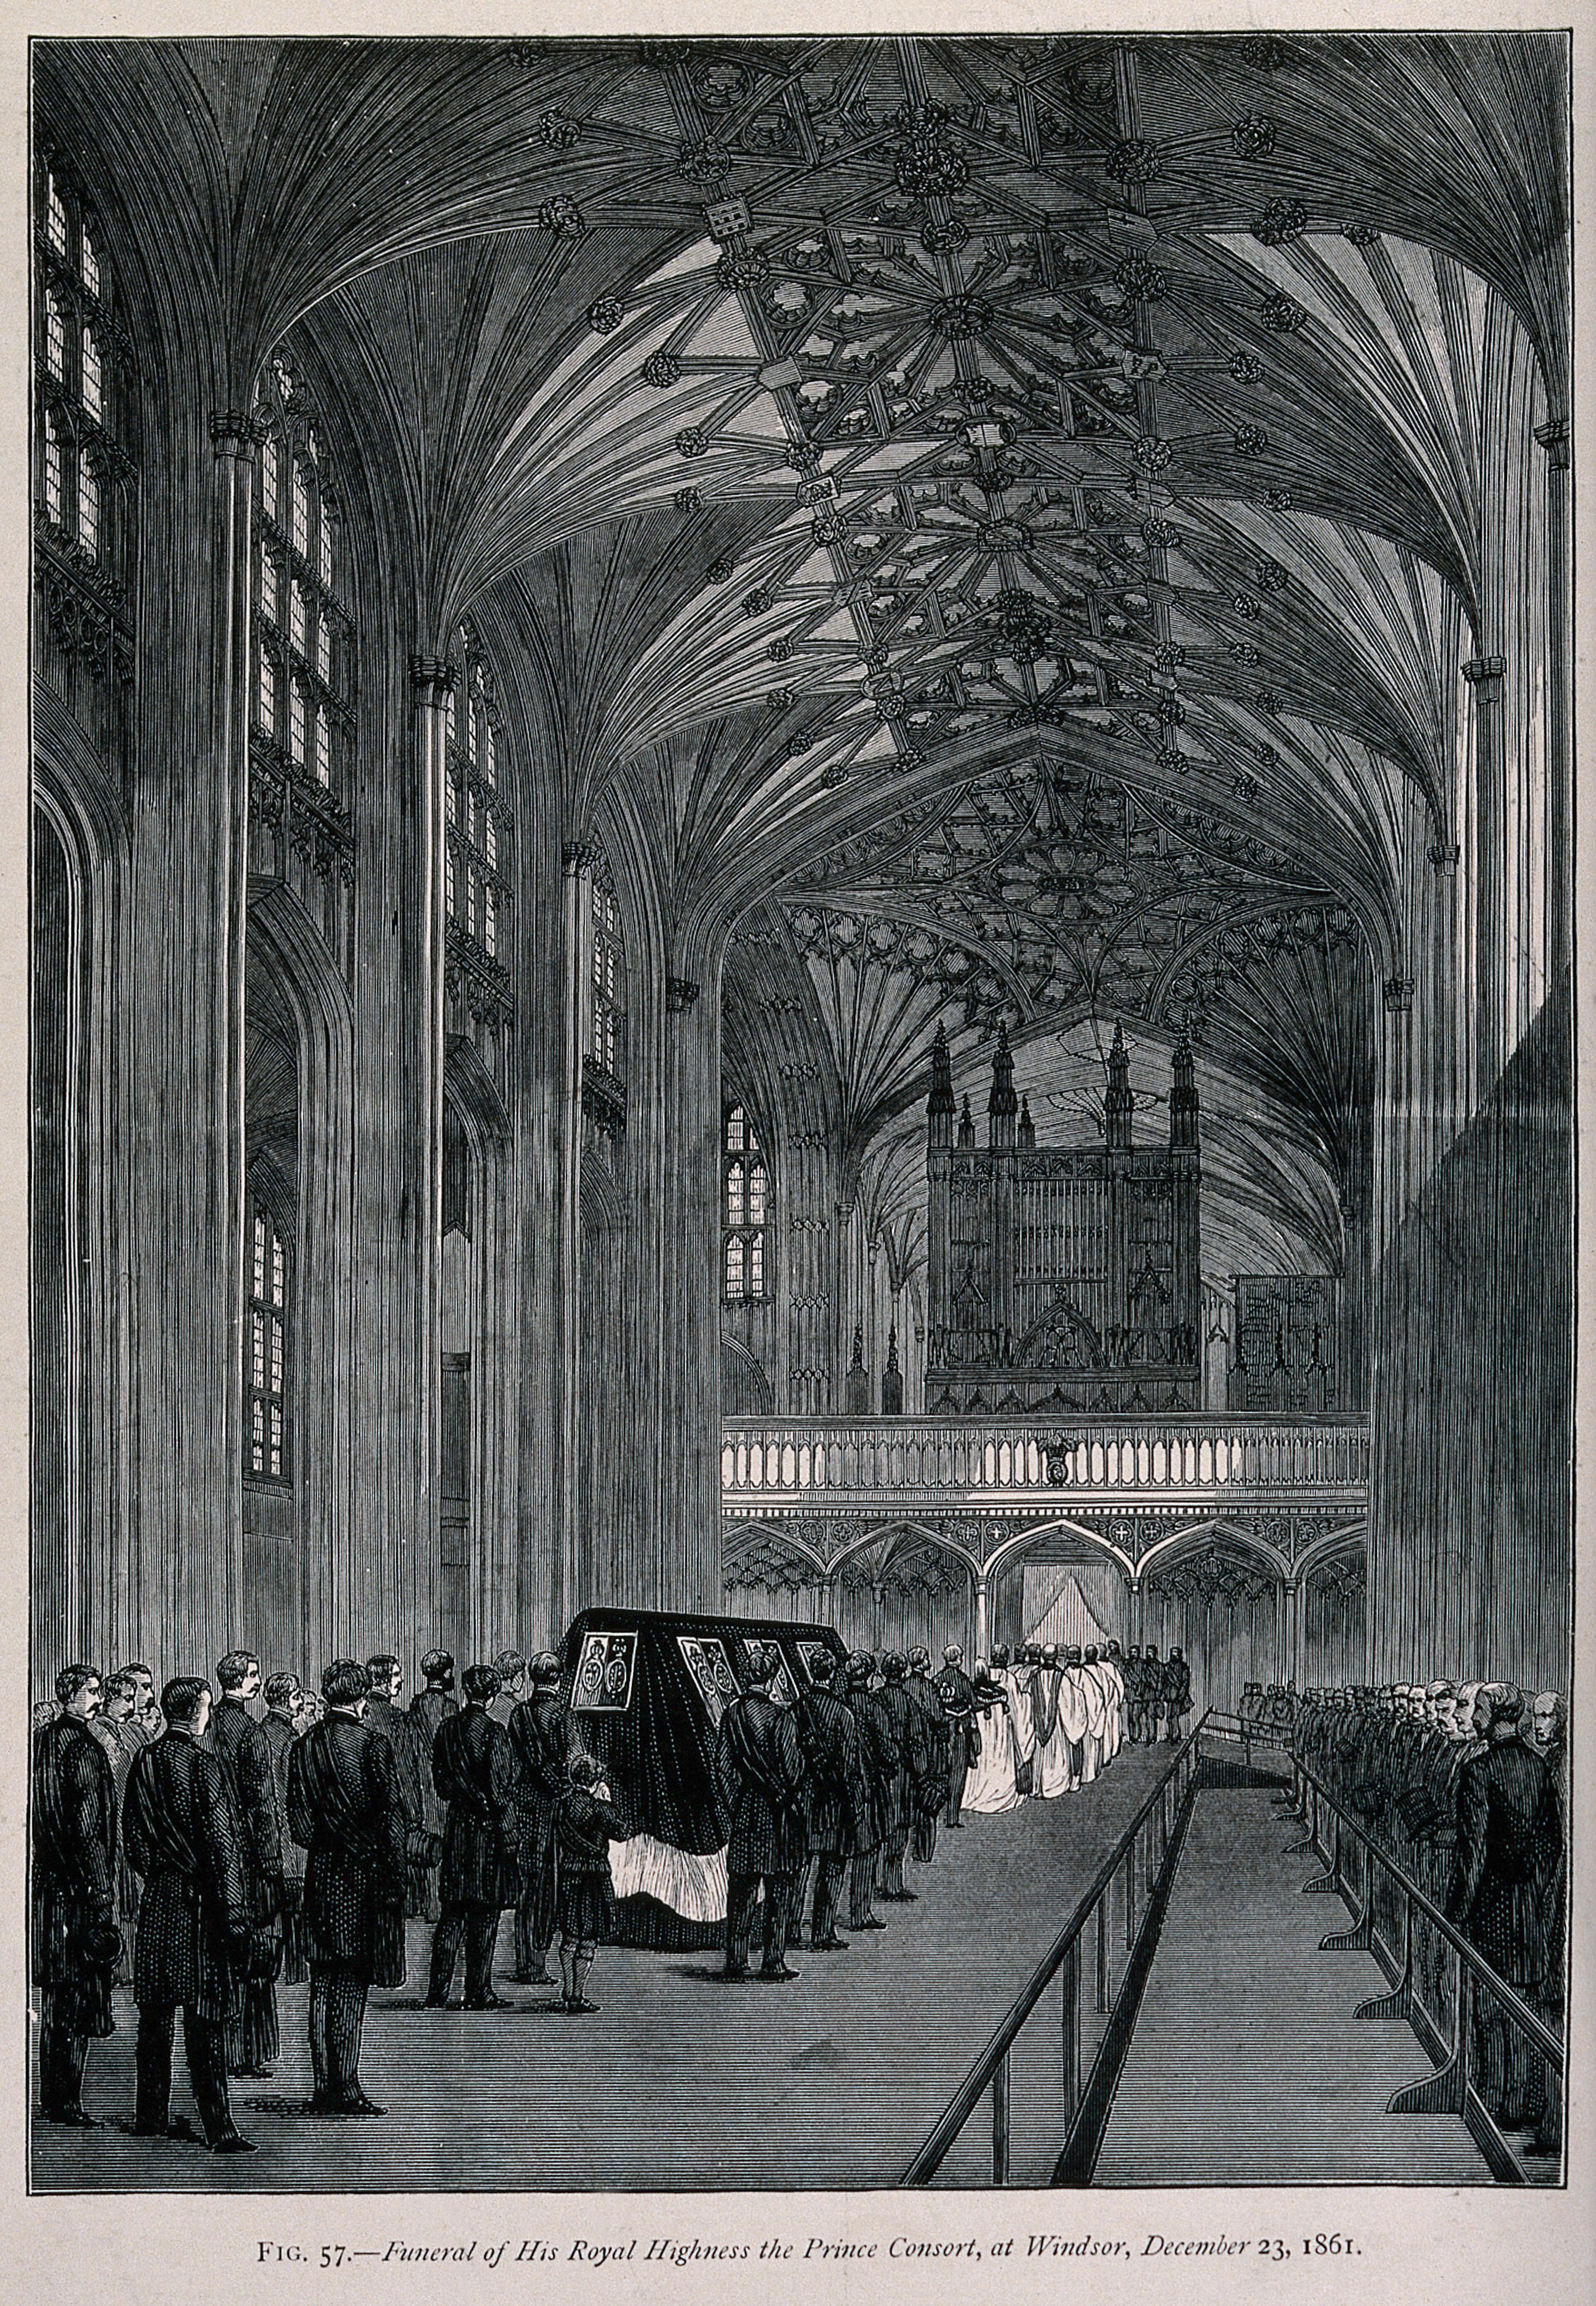 The funeral of Albert Prince Consort, in St George's Chapel, Windsor. Wood engraving, 1861.